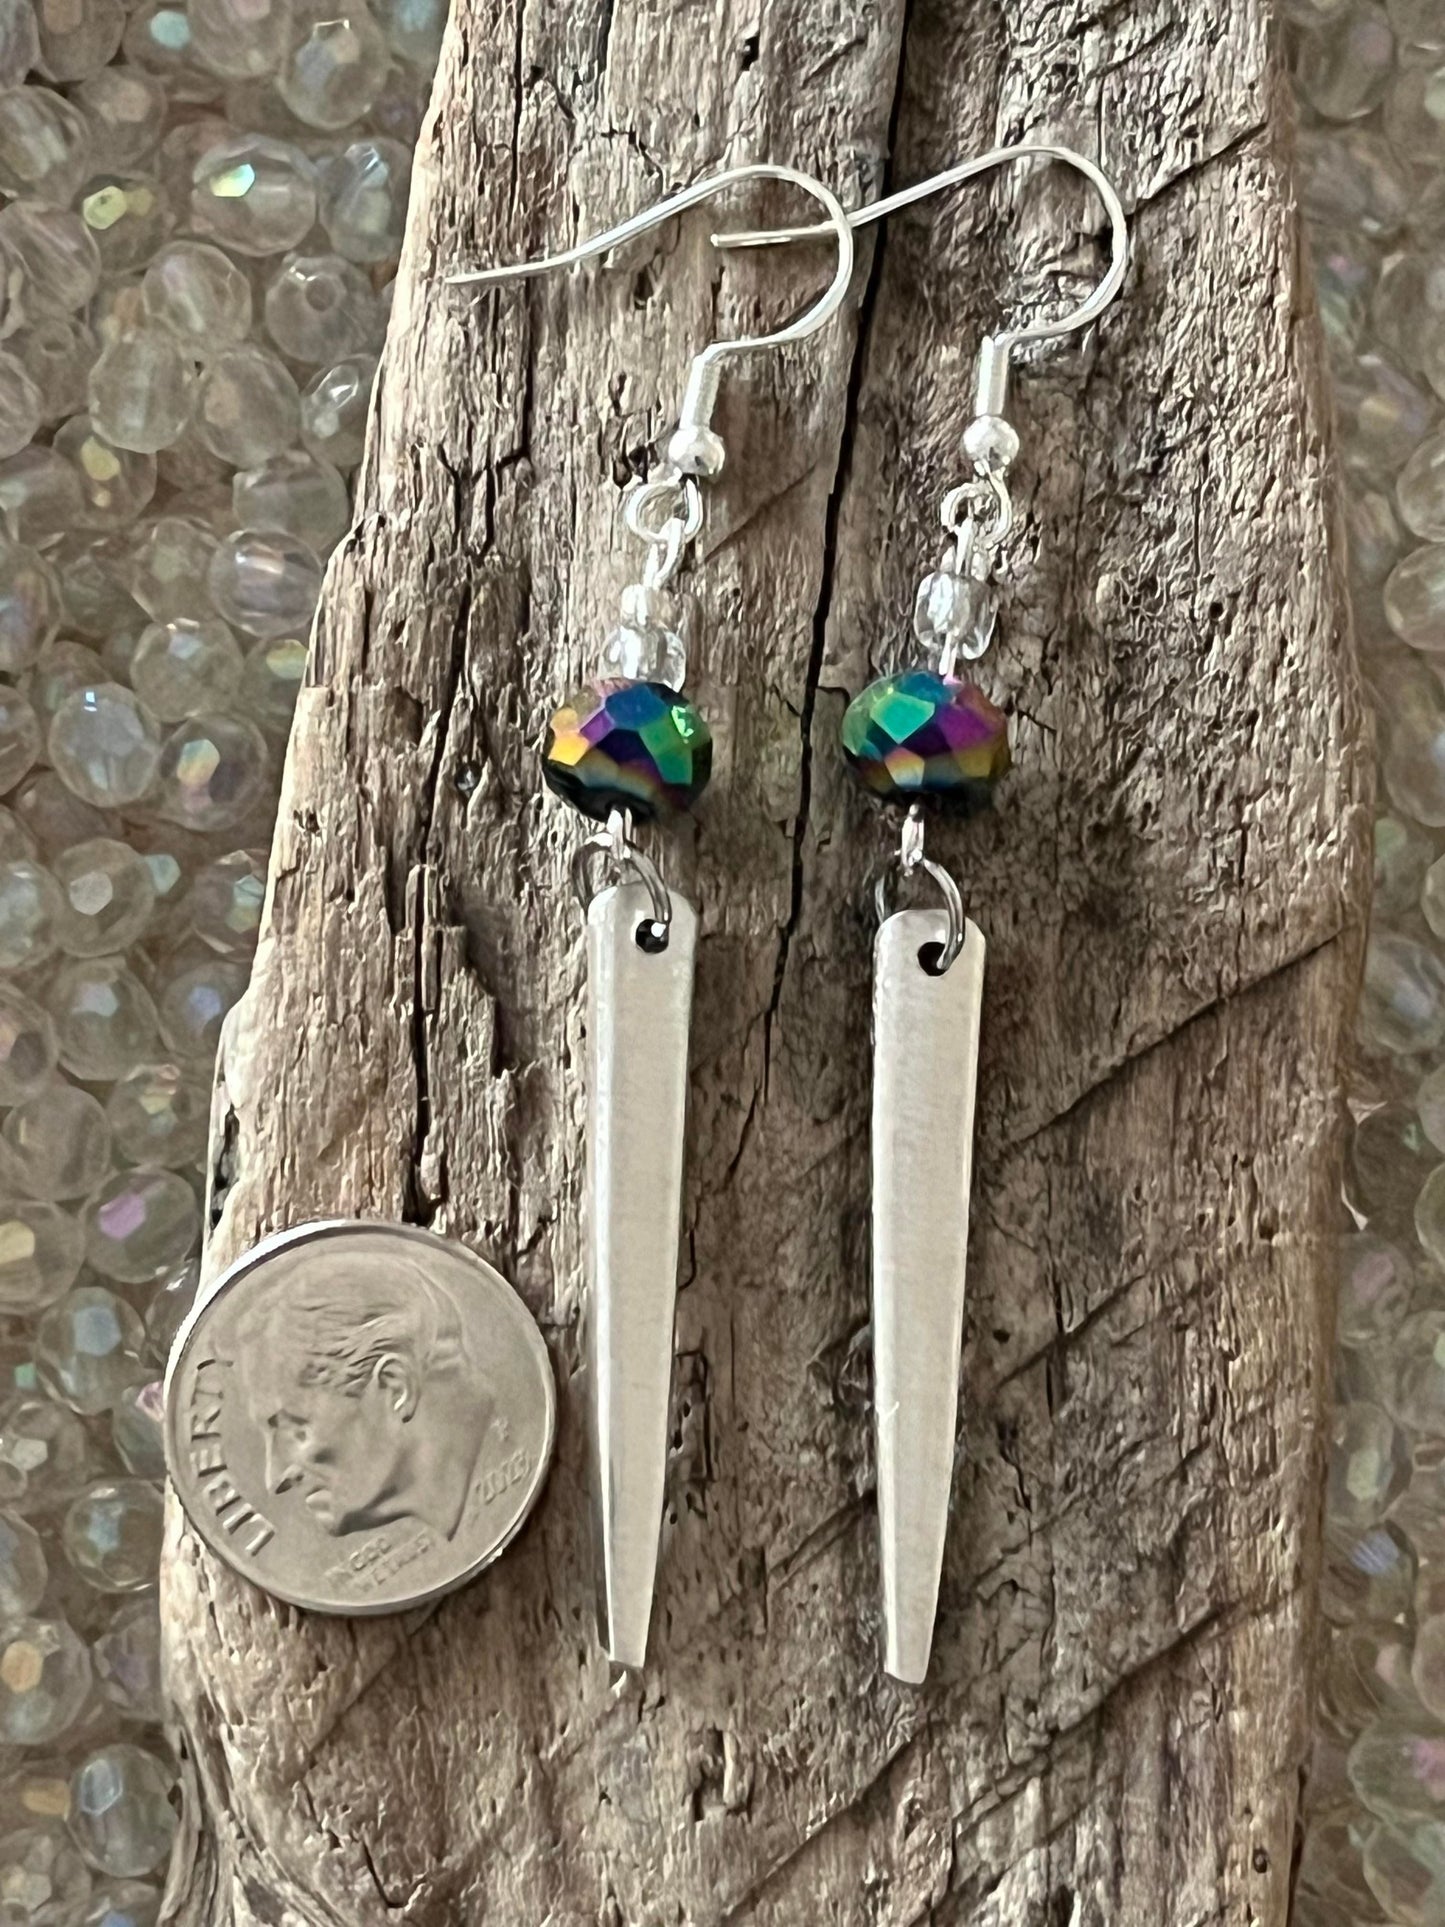 Earrings : Fork tines with beads.